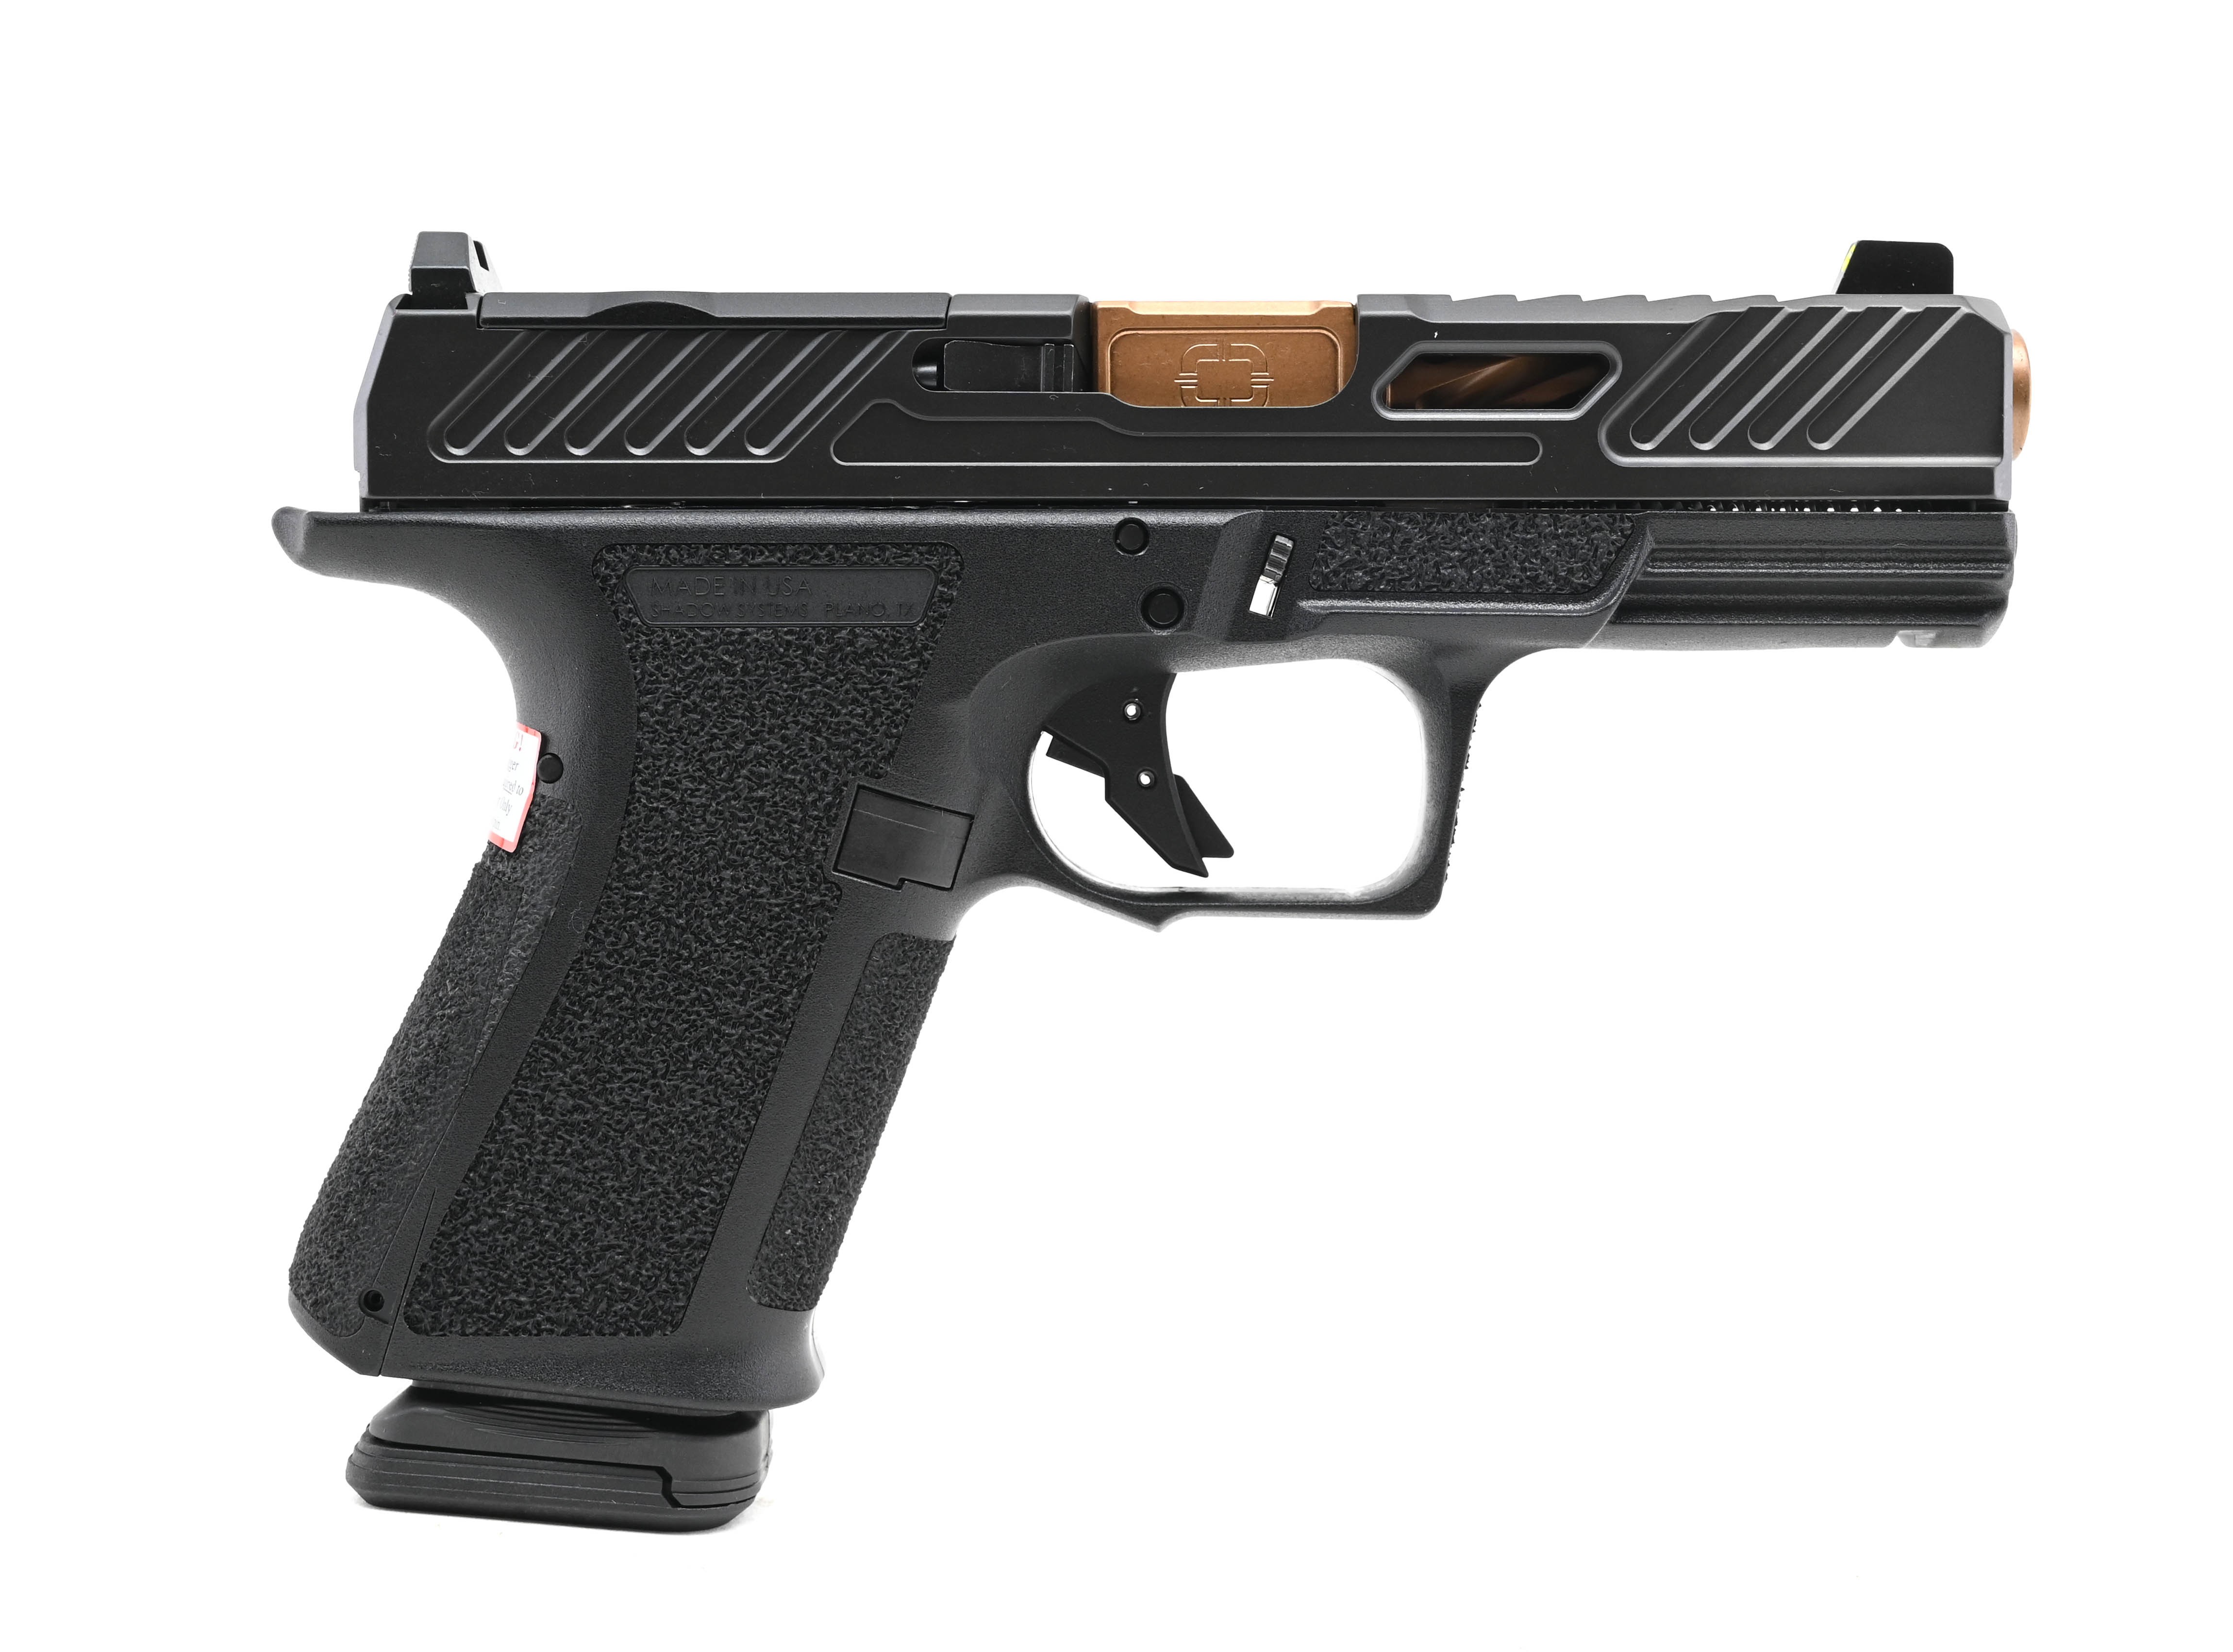 Shadow Systems MR920 9mm caliber pistol for sale.